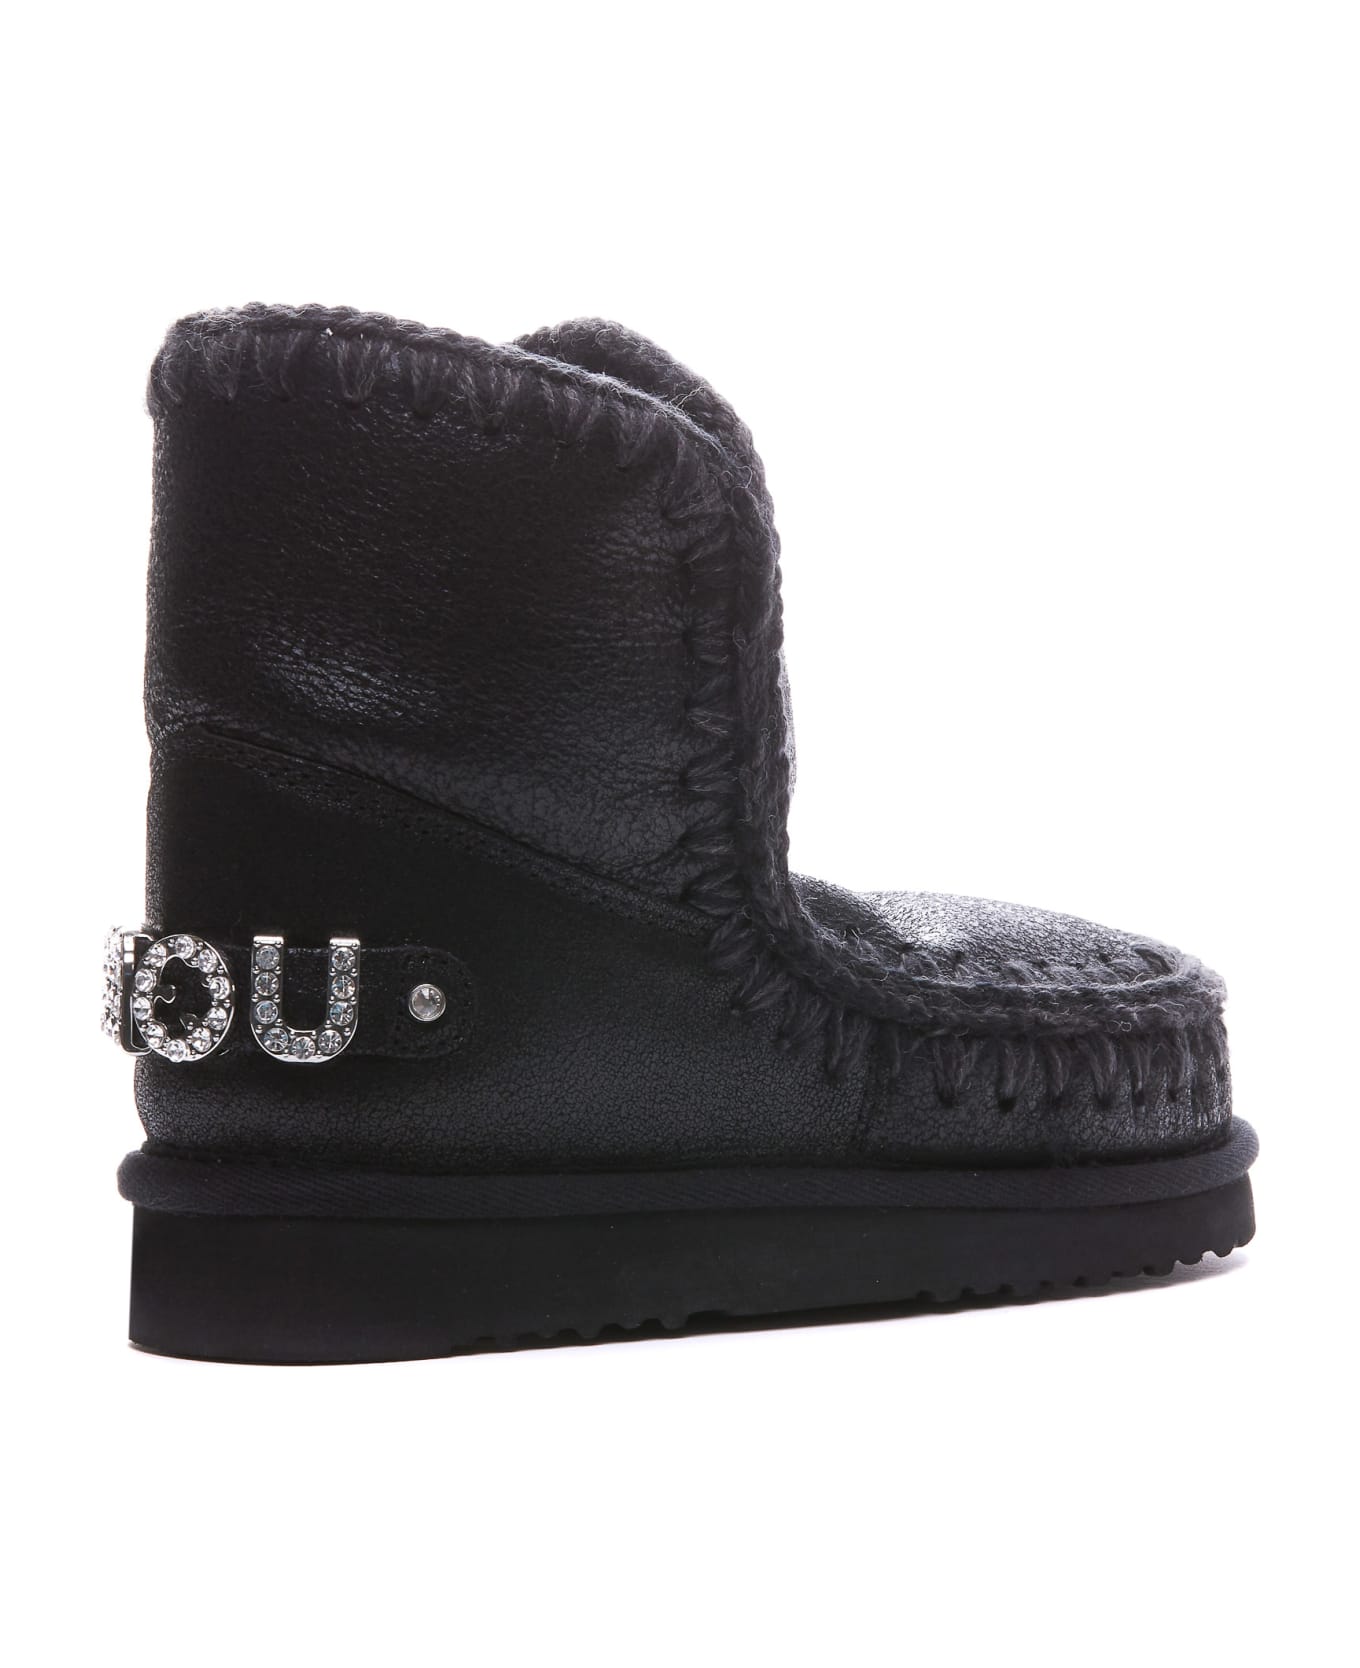 Mou Ankle Boots 'eskimo18' Made Of Leather - Nero ブーツ